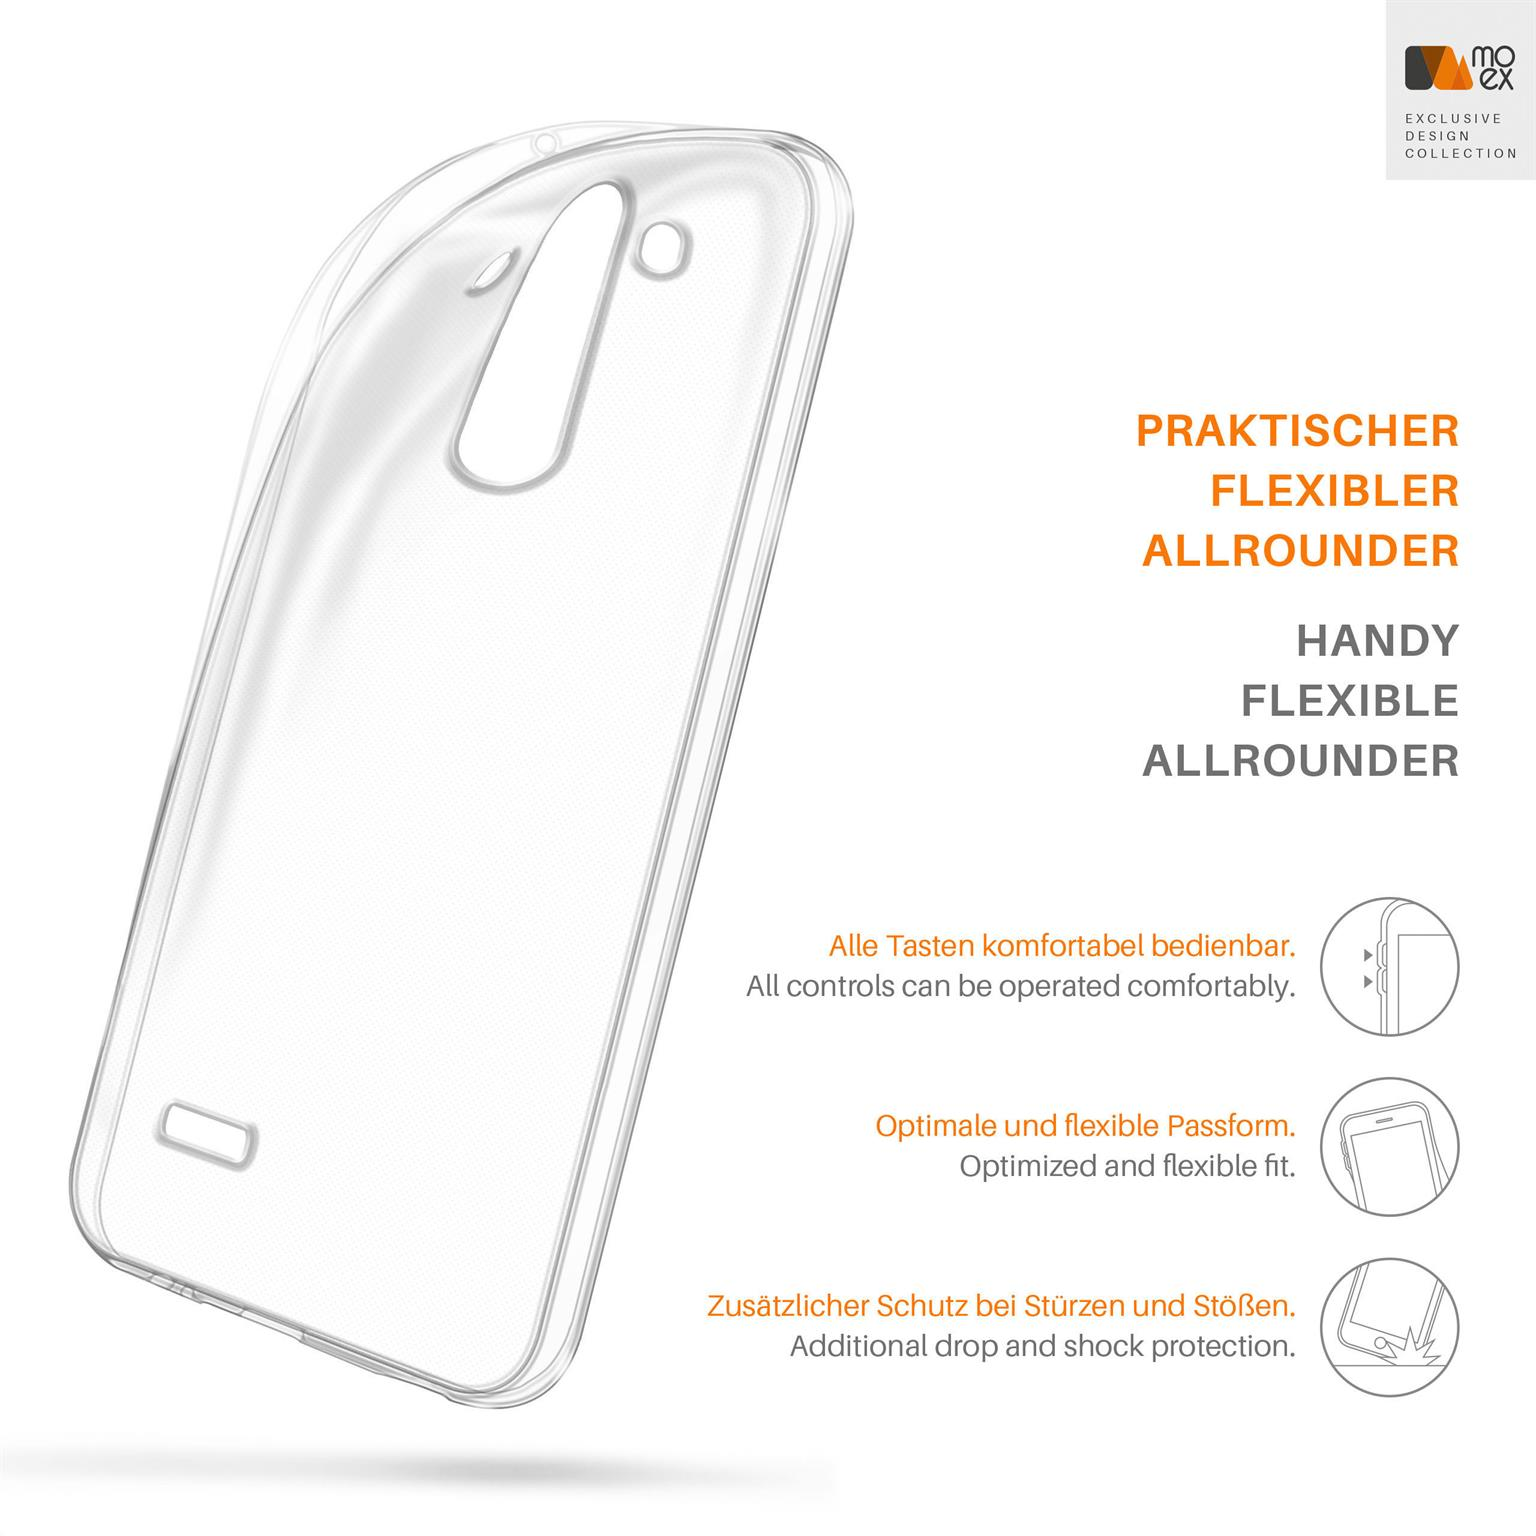 Backcover, Crystal-Clear G4, LG, Aero Case, MOEX